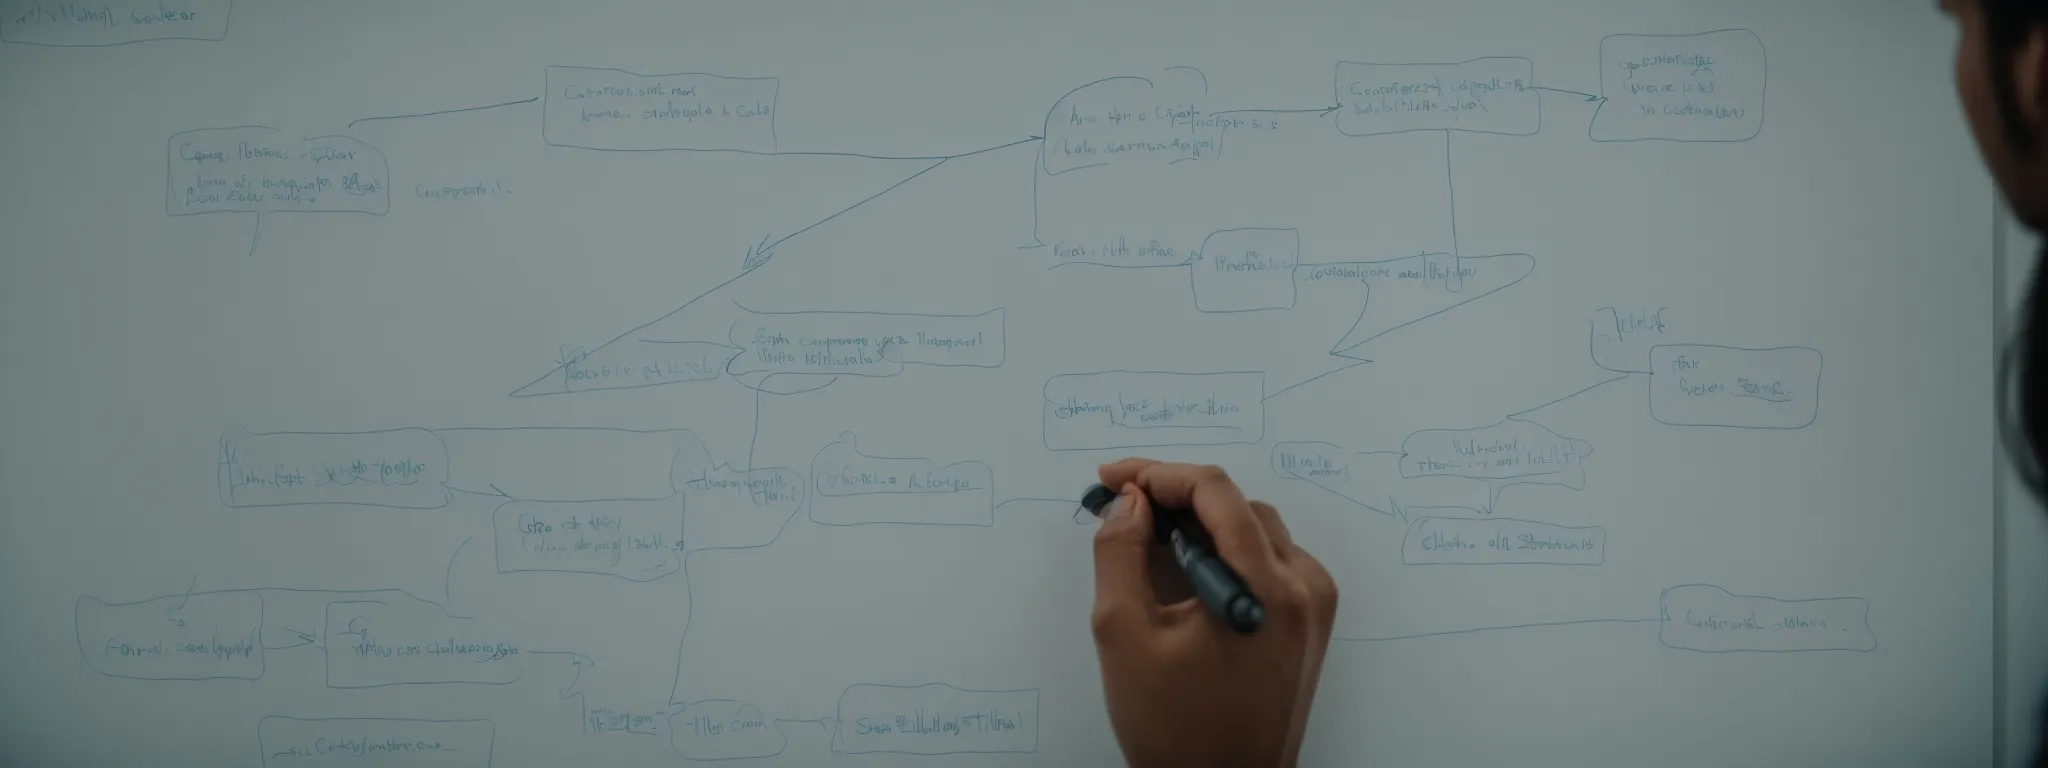 a person drawing a complex flowchart on a whiteboard to illustrate a structured content strategy.